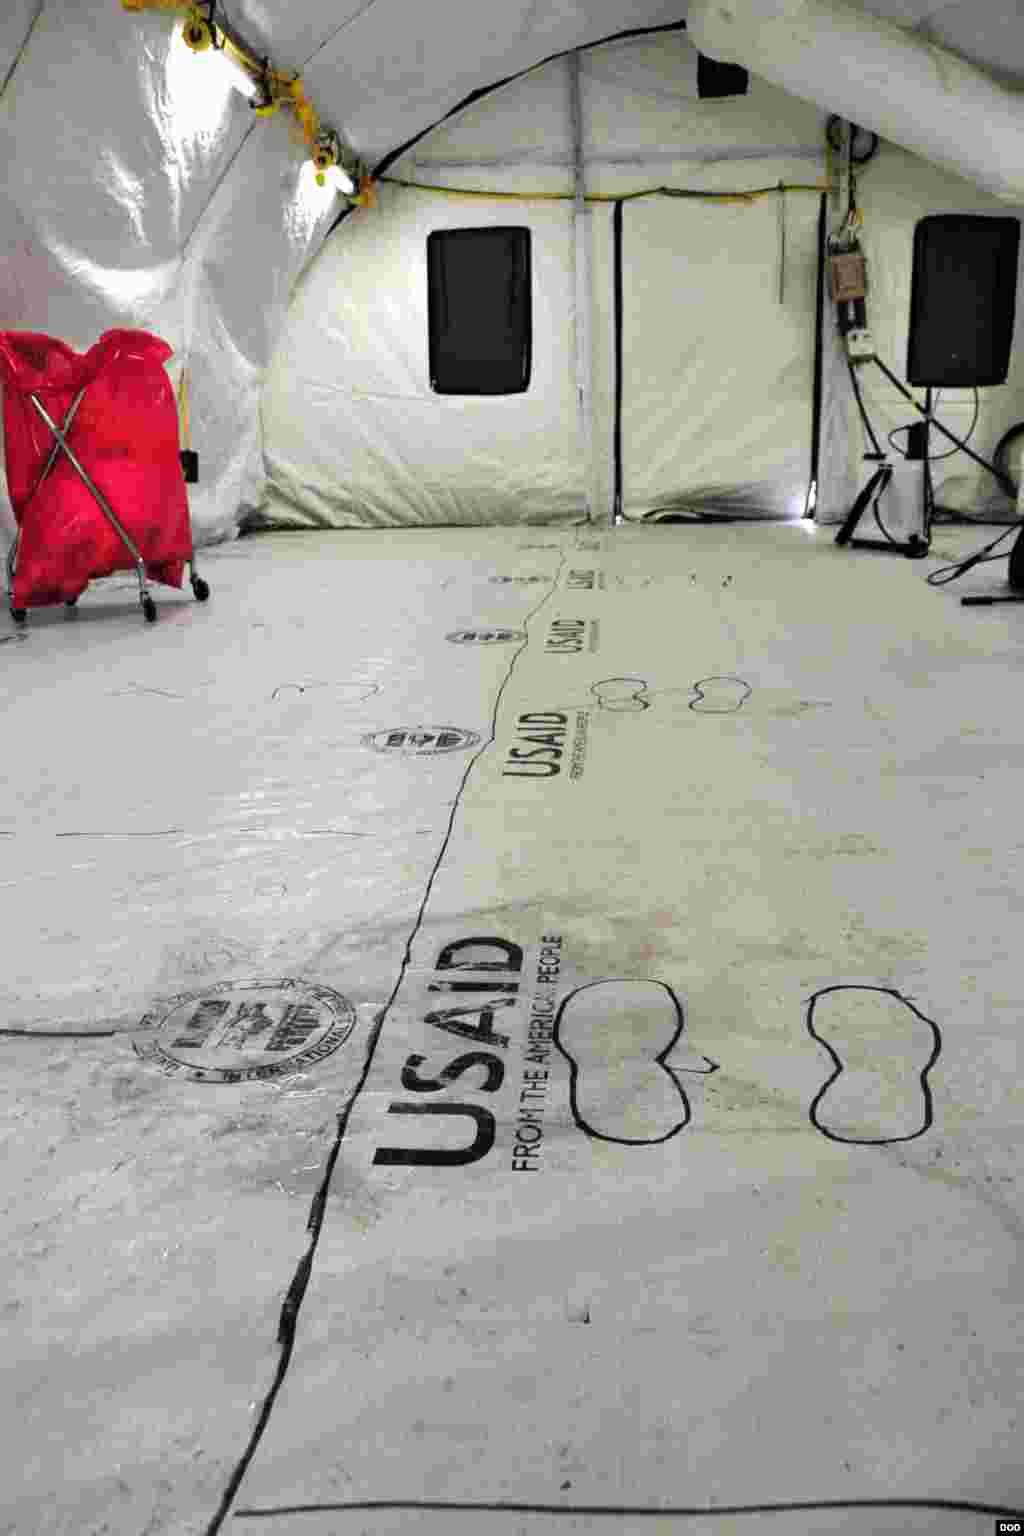 Footprint outlines mark the floor in the doffing station where medical workers at the Monrovia Medical Unit will decontaminate and take off their personal protective equipment after working in the high-risk Ebola zone, near Monrovia, Liberia, Nov. 4, 2014. (Sgt. 1st Class Nathan Hoskins/DOD)